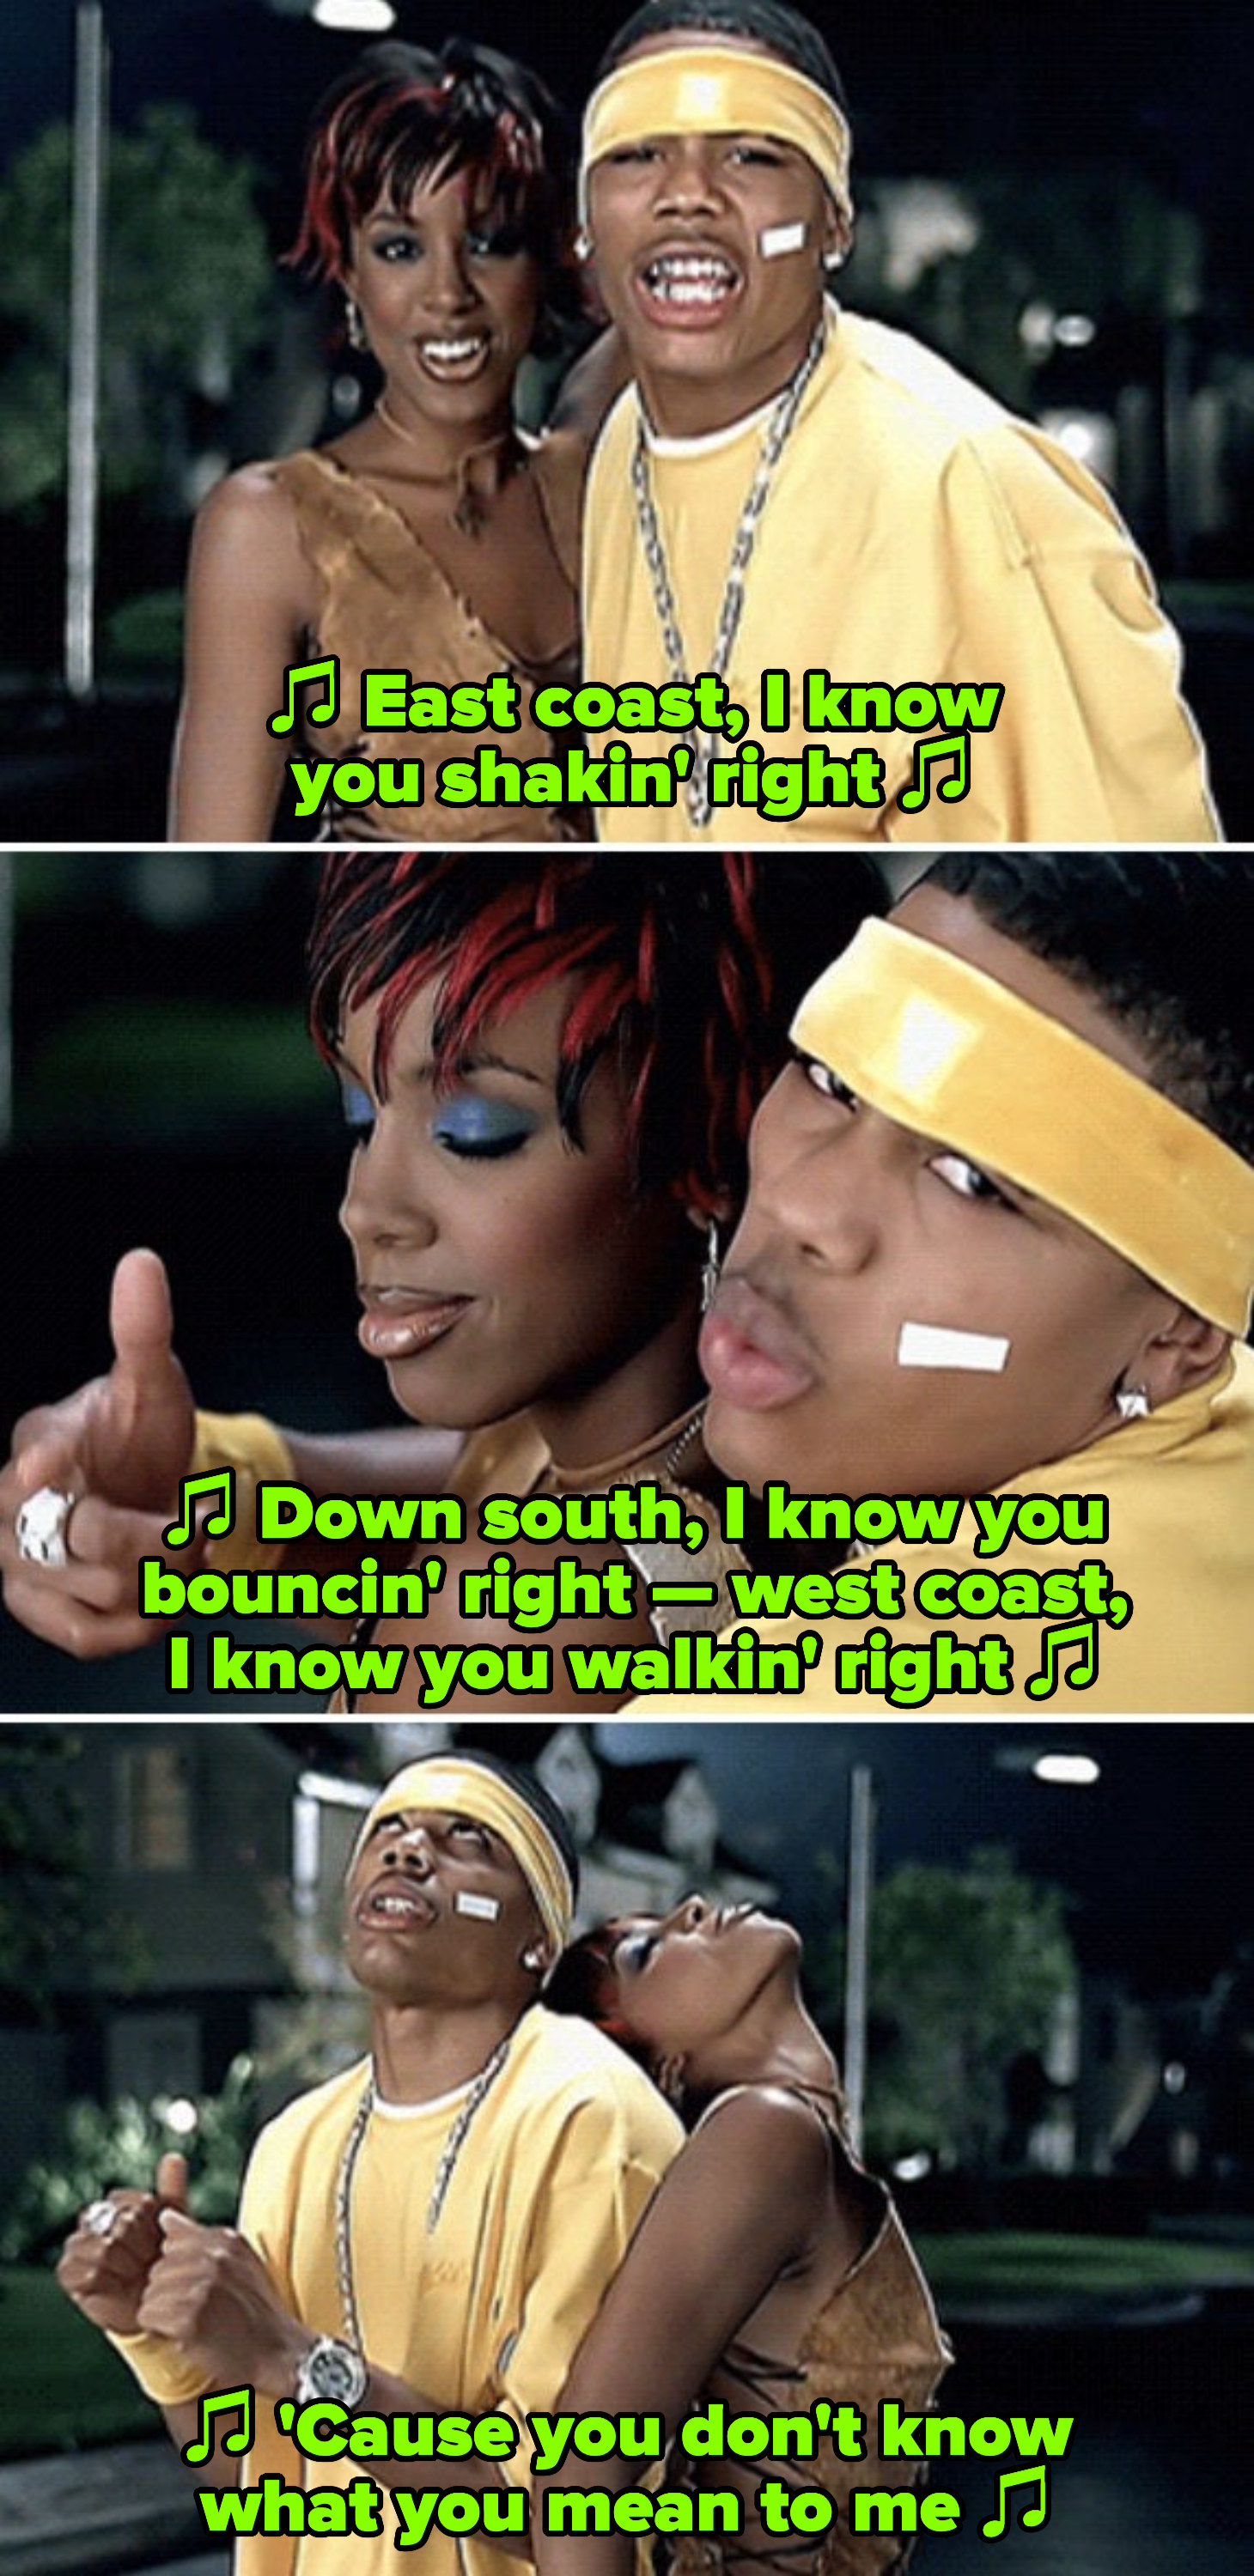 Rowland and Nelly in their &quot;Dilemma&quot; music video, singing: &quot;East coast, I know you shakin&#x27; right, down south, I know you bouncin&#x27; right&quot;